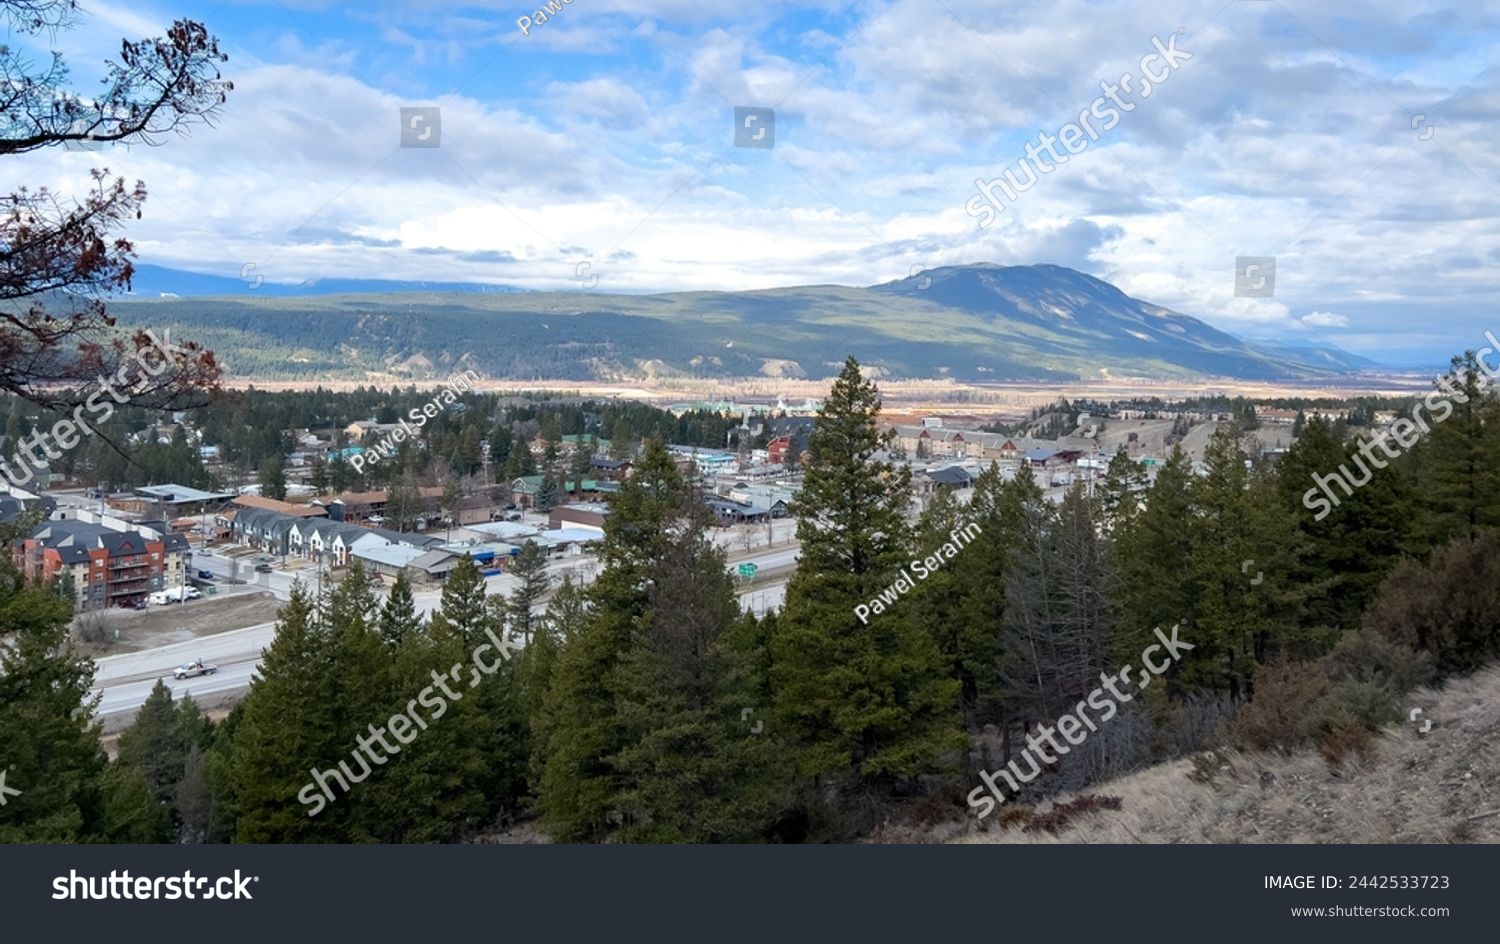 Beautiful view of the Purcell Mountain Range and Village of Radium Hot Springs #2442533723